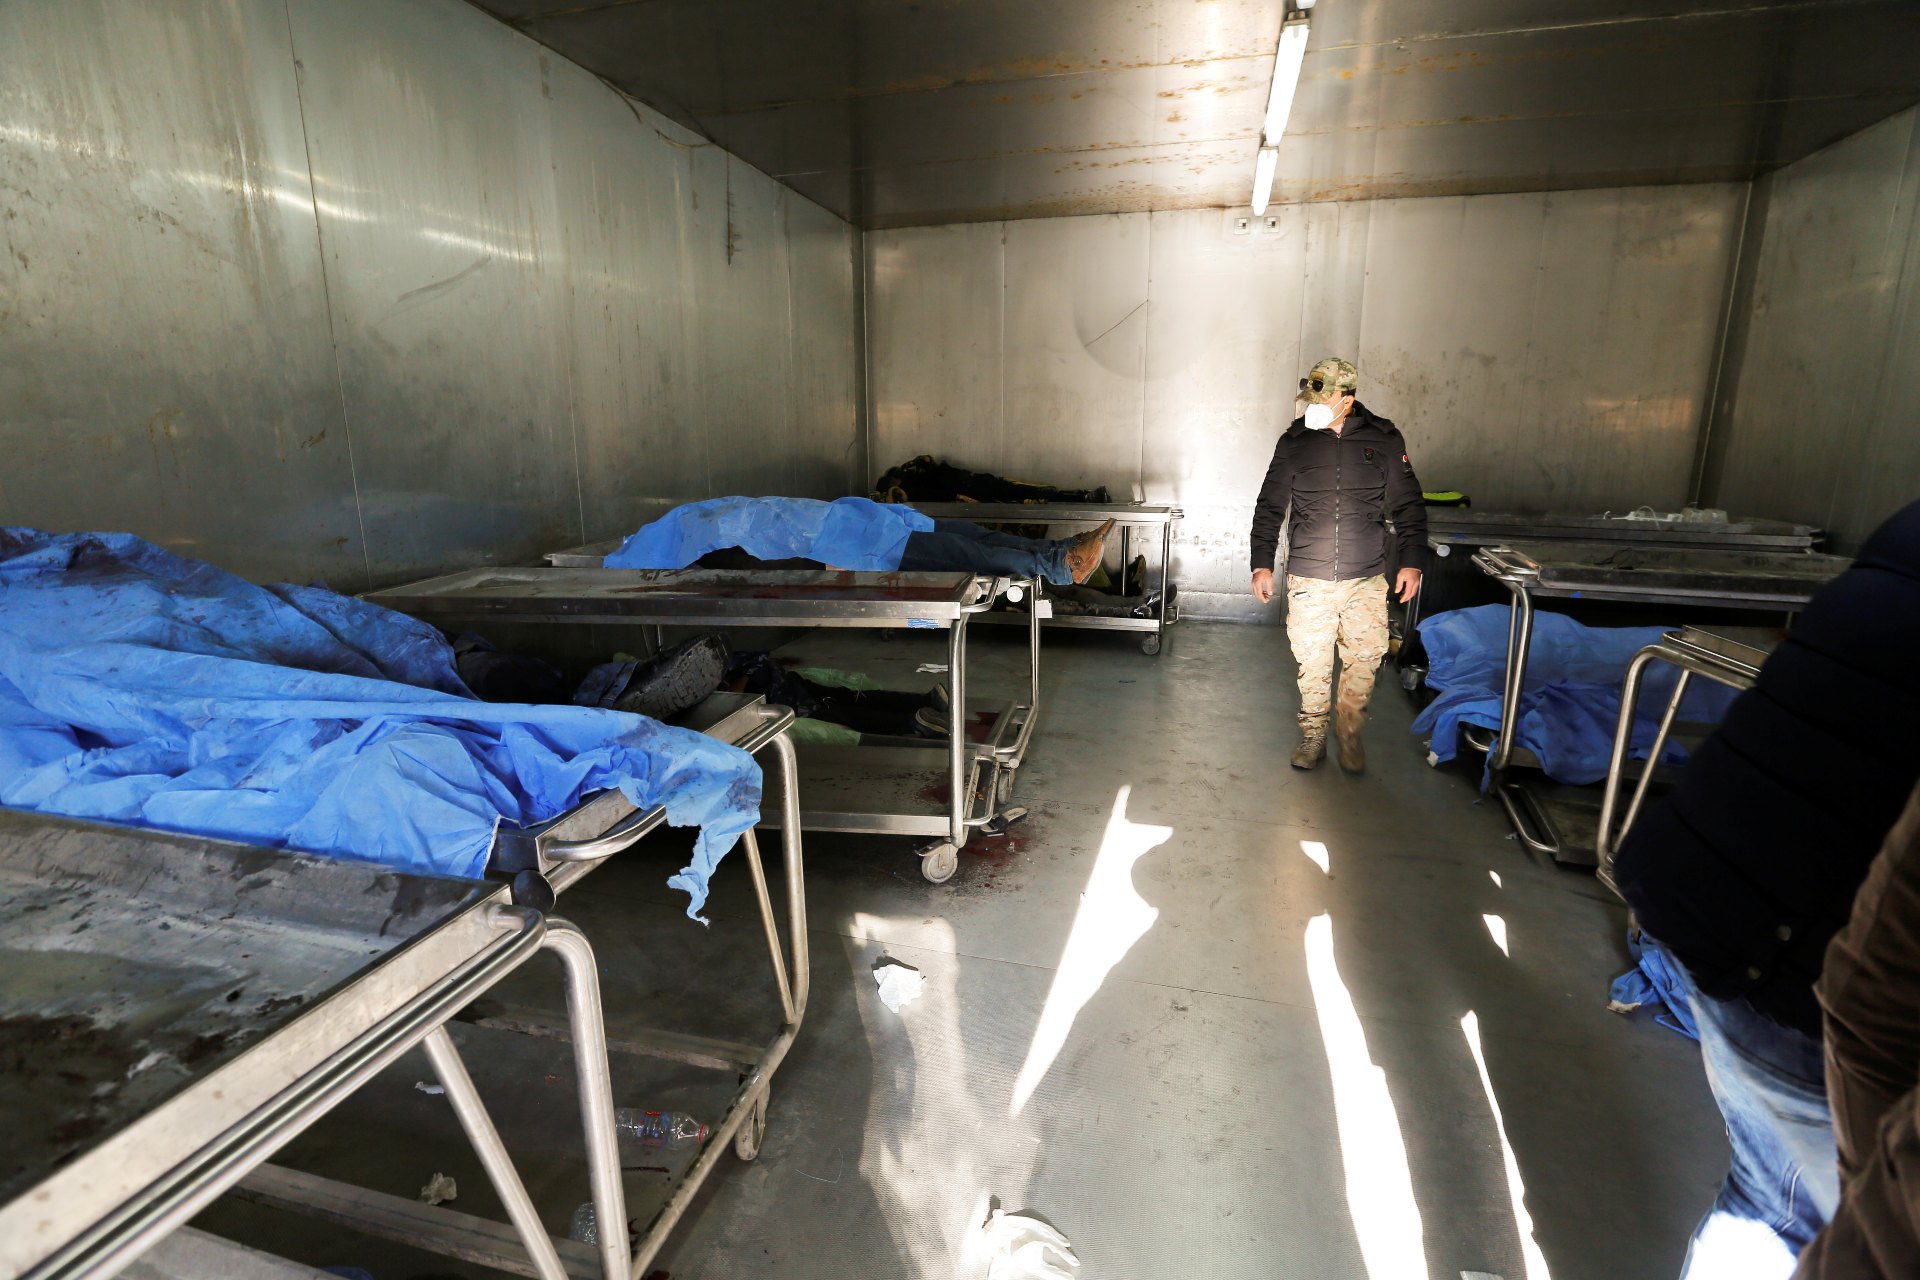 A man looks at the covered bodies of people who were killed during a twin suicide bombing attack in a central Baghdad market, at the al-Kindi hospital morgue in Baghdad (Reuters)